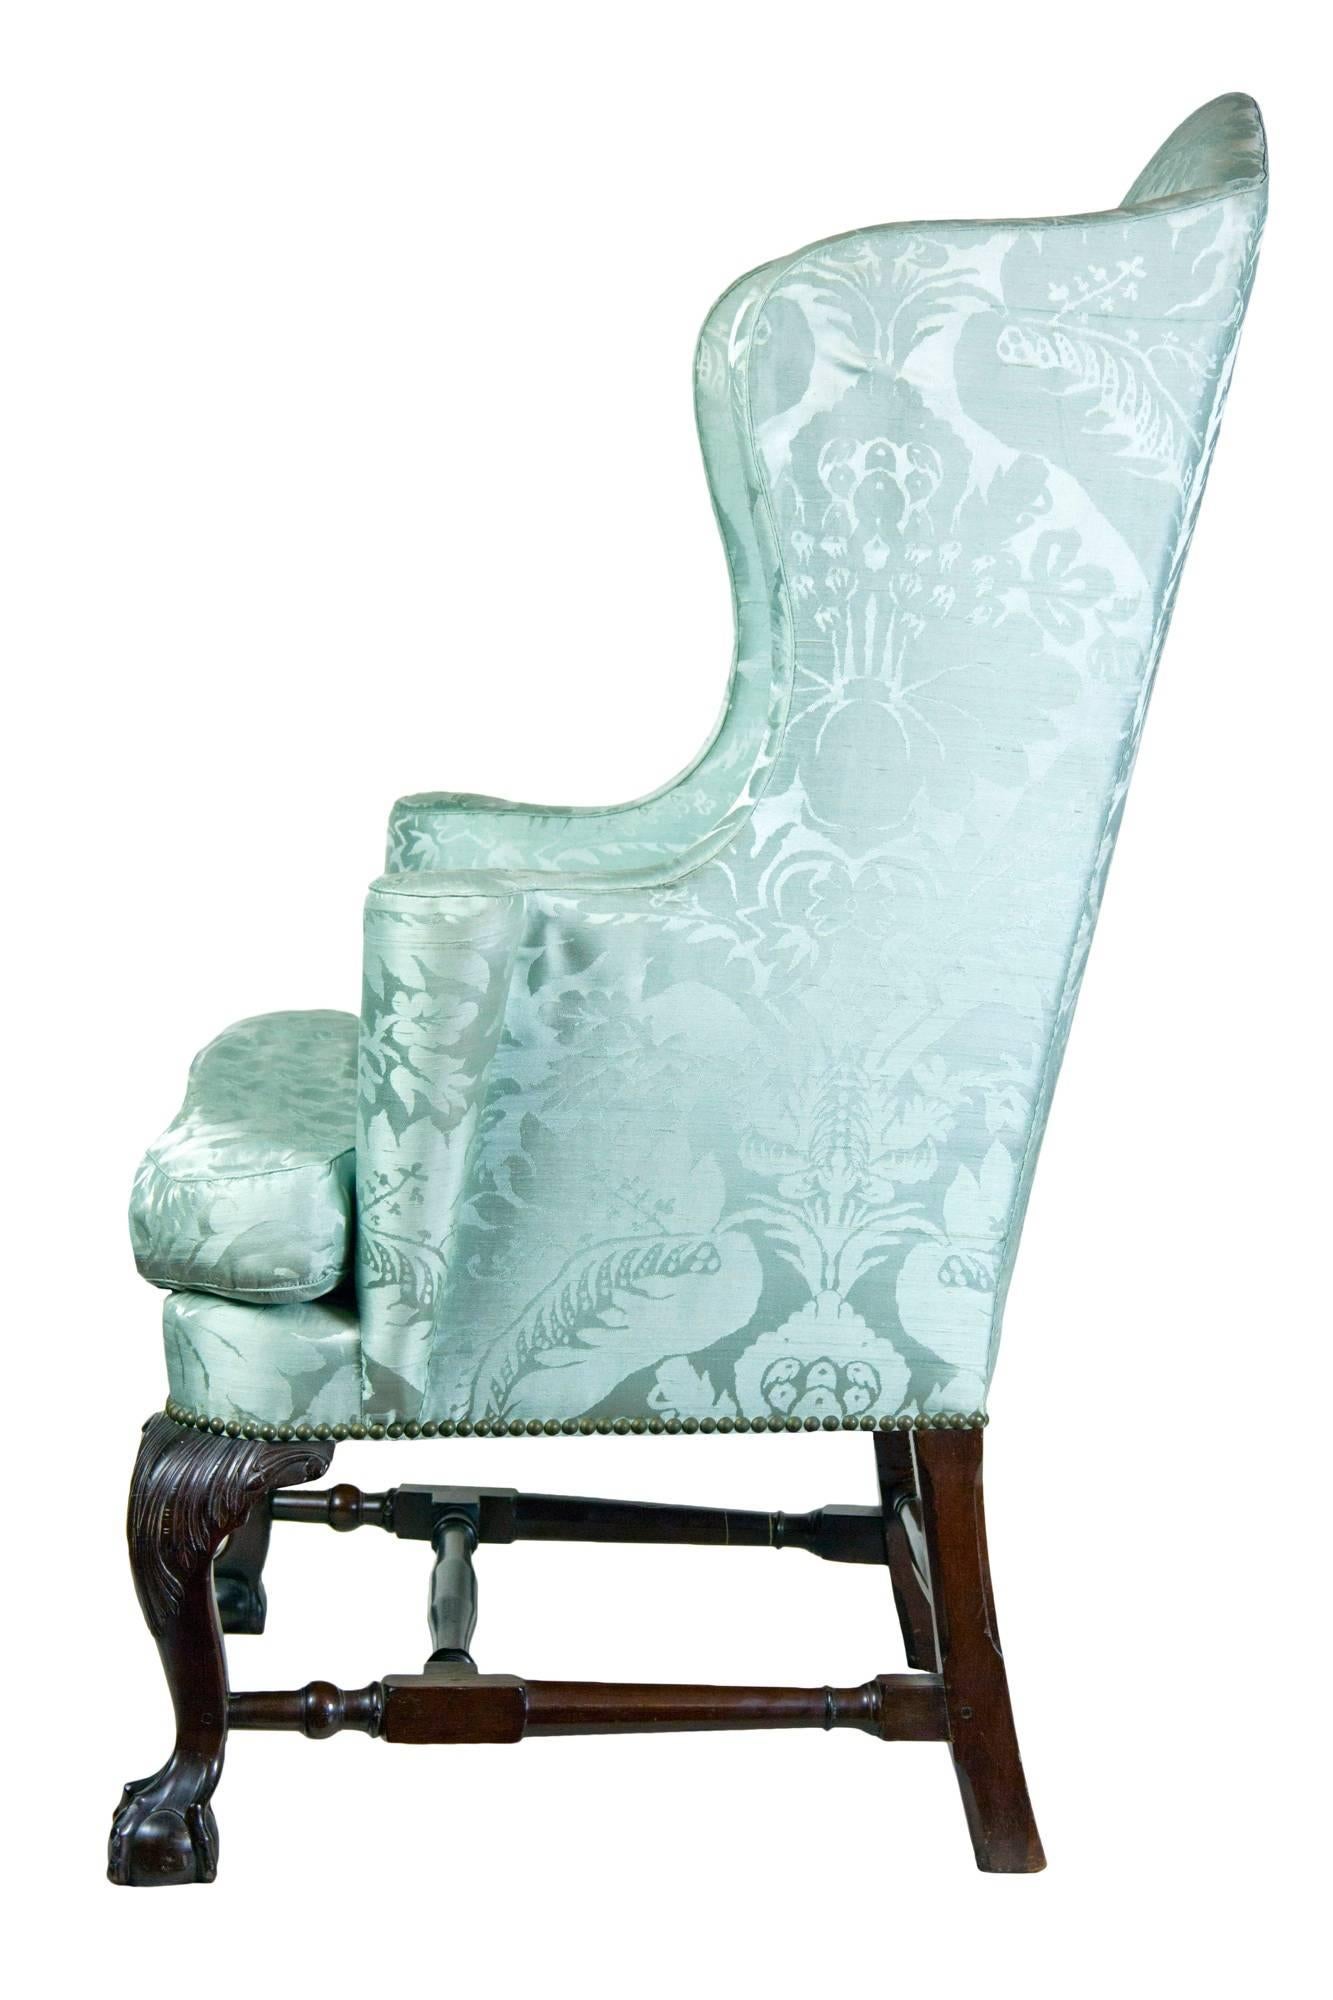 This is the best, most highly developed form of the colonial wing chair produced in Boston, circa 1760. A mate to it is in the MFA (see scanned image below). This chair makes a bold statement with its highly desirable form, including shaped wings,